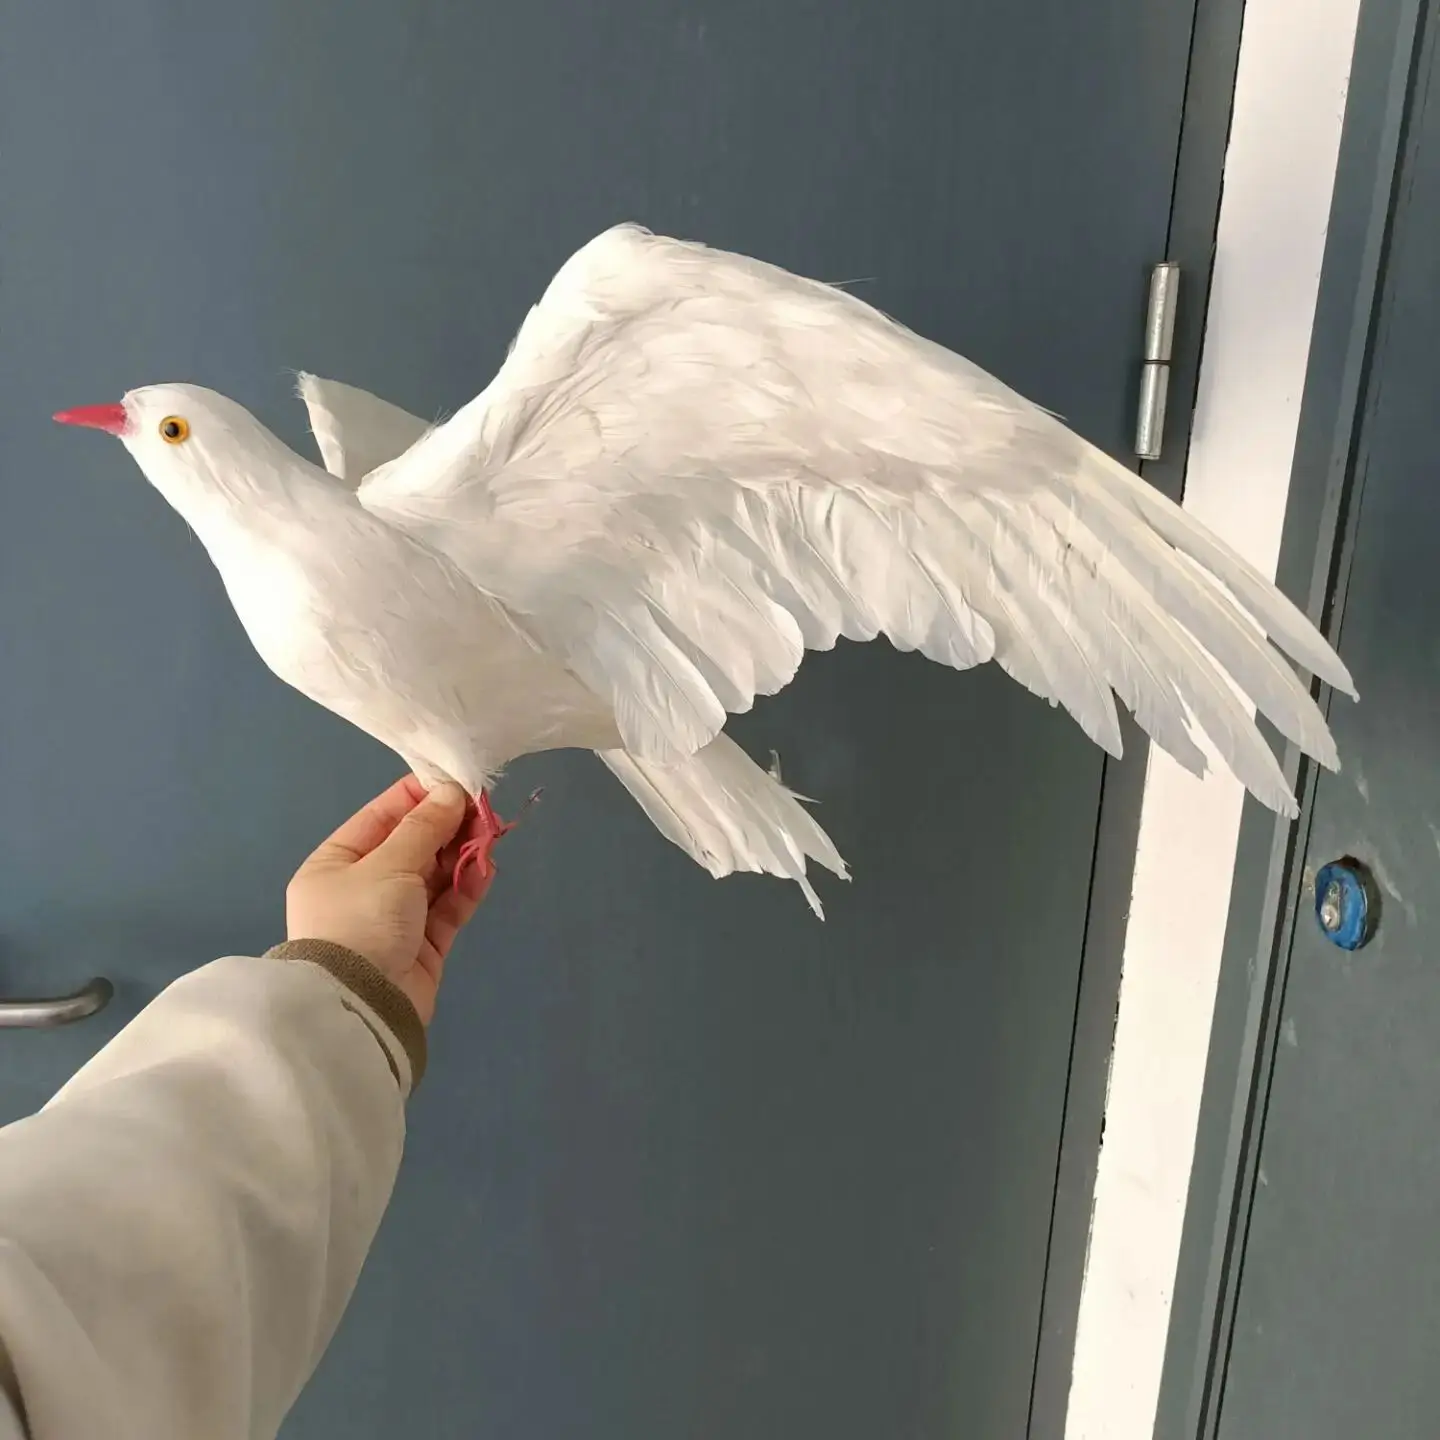 big-simulation-plastic-and-feathers-wings-white-dove-model-toy-gift-about-40x70cm-h2704